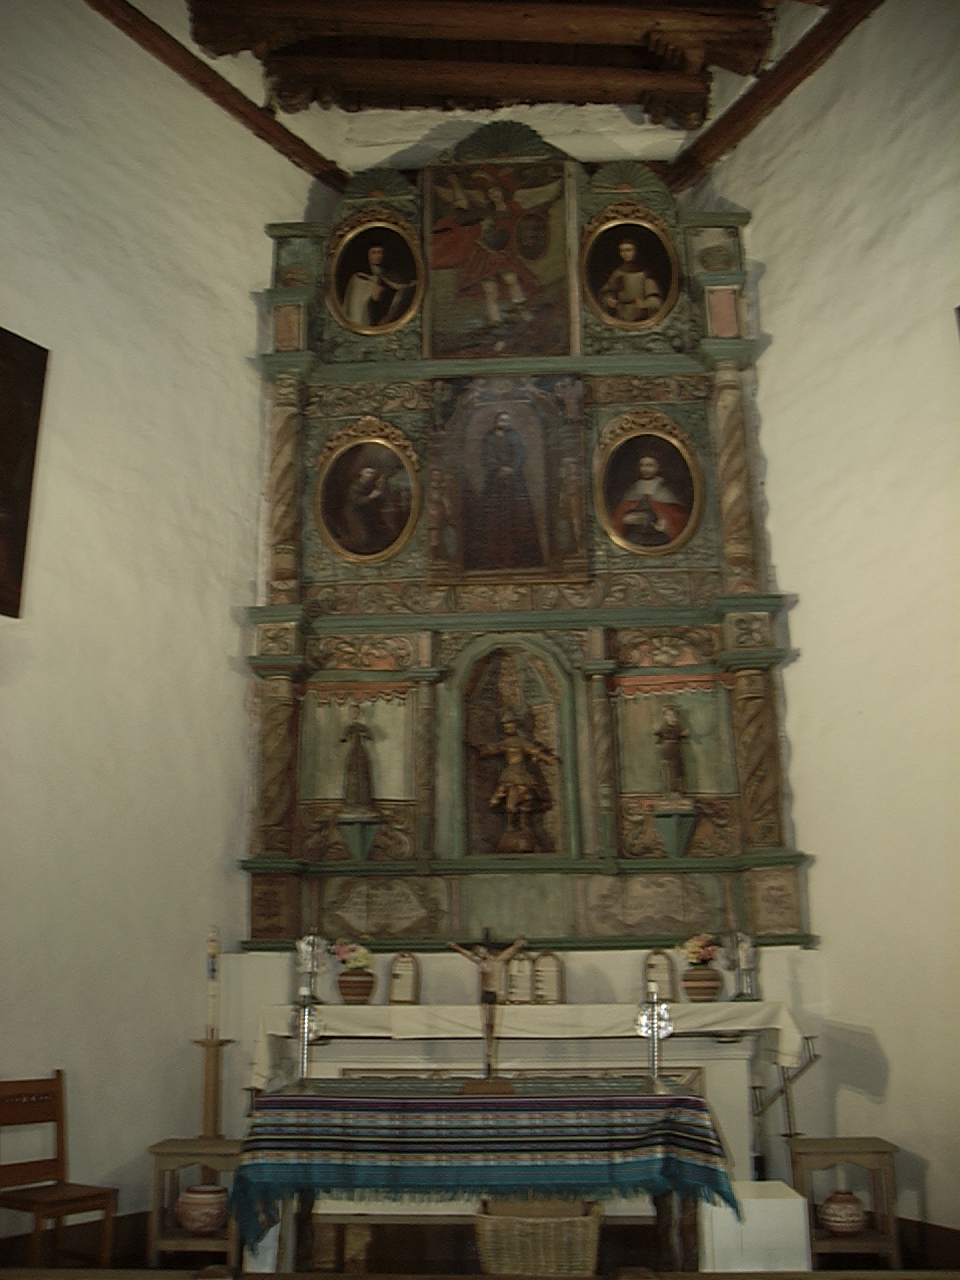 The reredos or altar screen in San Miguel Church